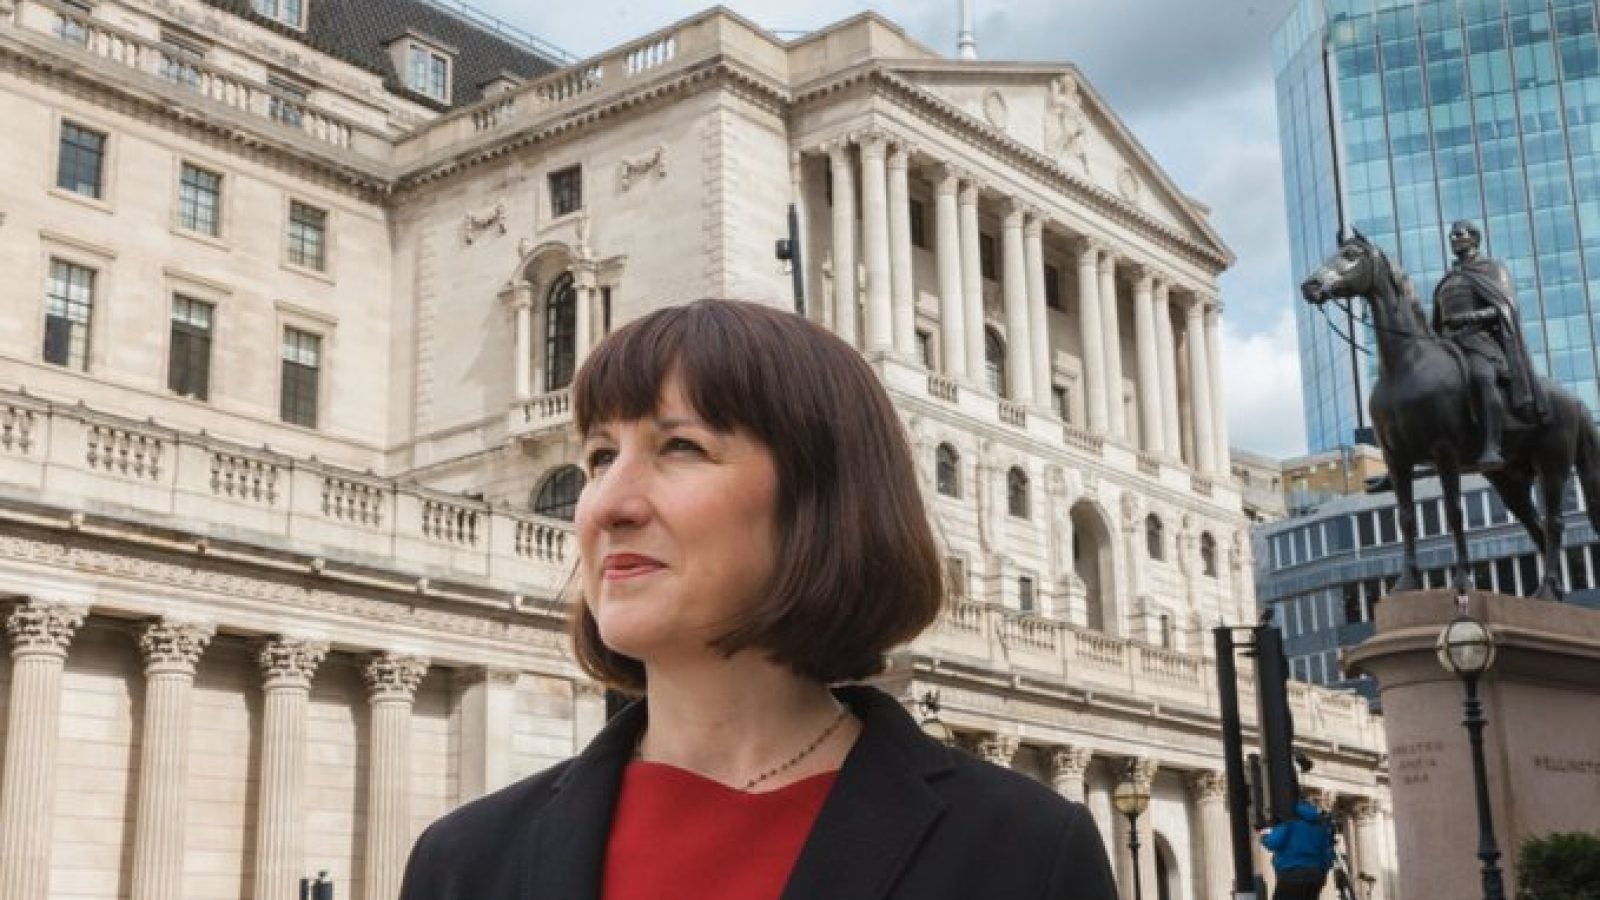 Shadow chancellor Rachel Reeves, in a speech in the City of London, accused the Conservatives of ‘gaslighting’ the public over the state of the economy